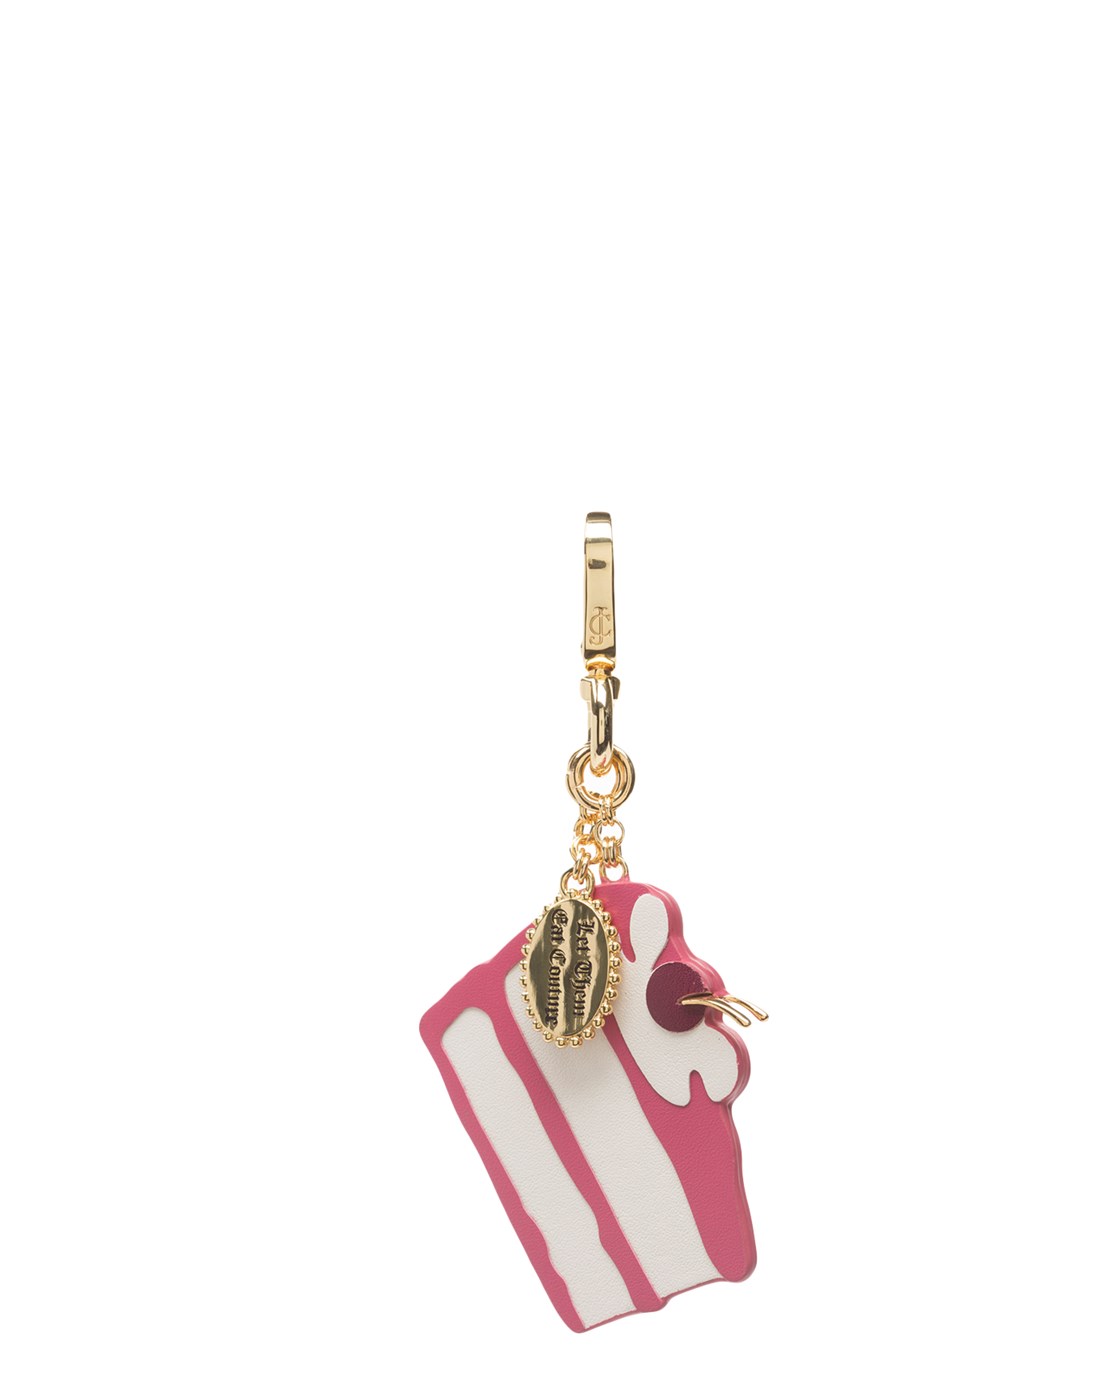 Juicy Couture Couture Cake Leather Key Fob